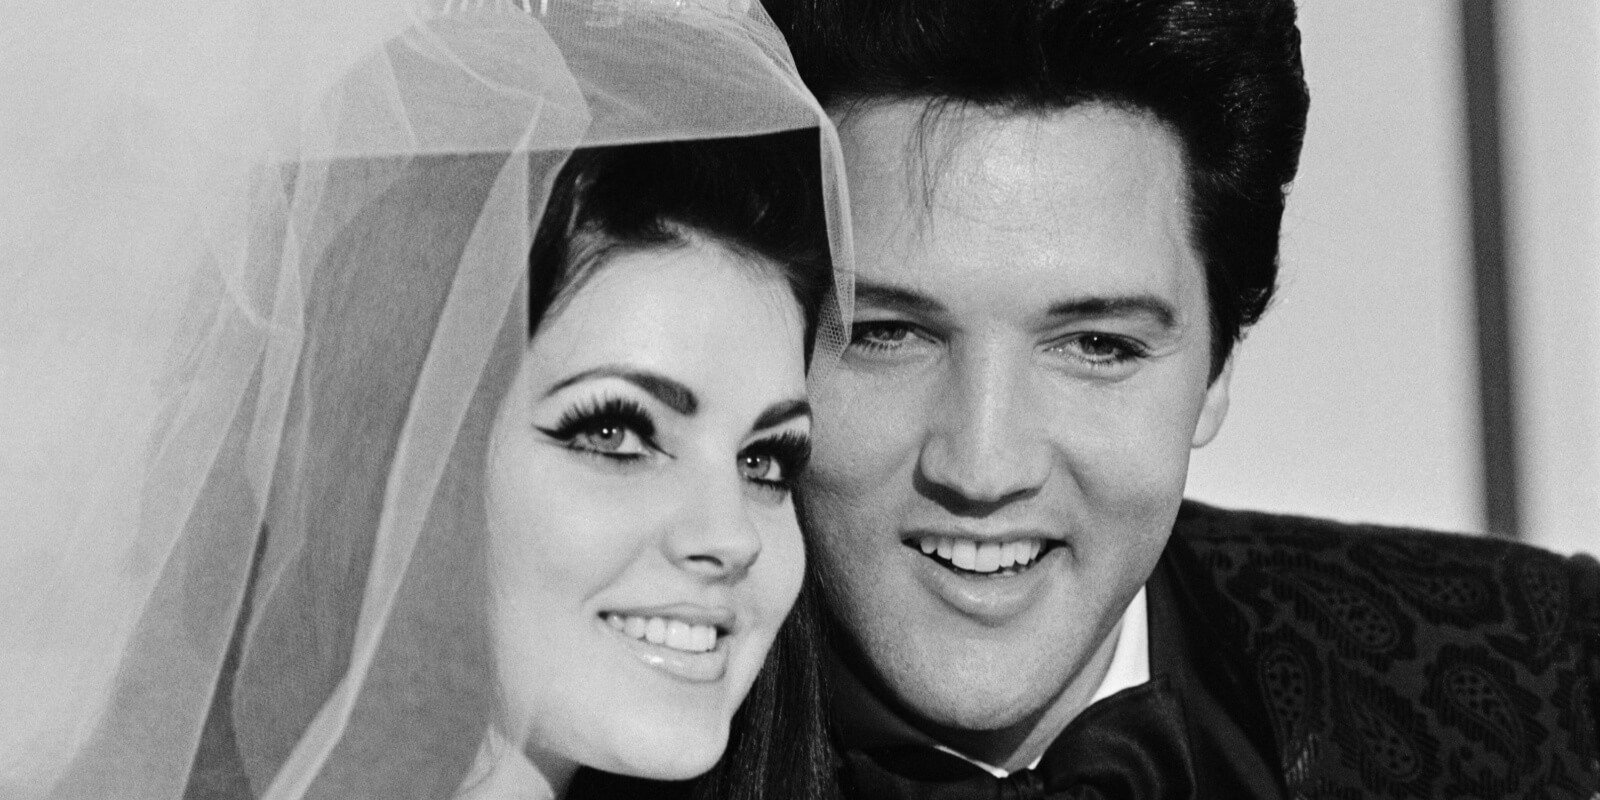 Priscilla Presley and Elvis Presley on their wedding day in May 1967.